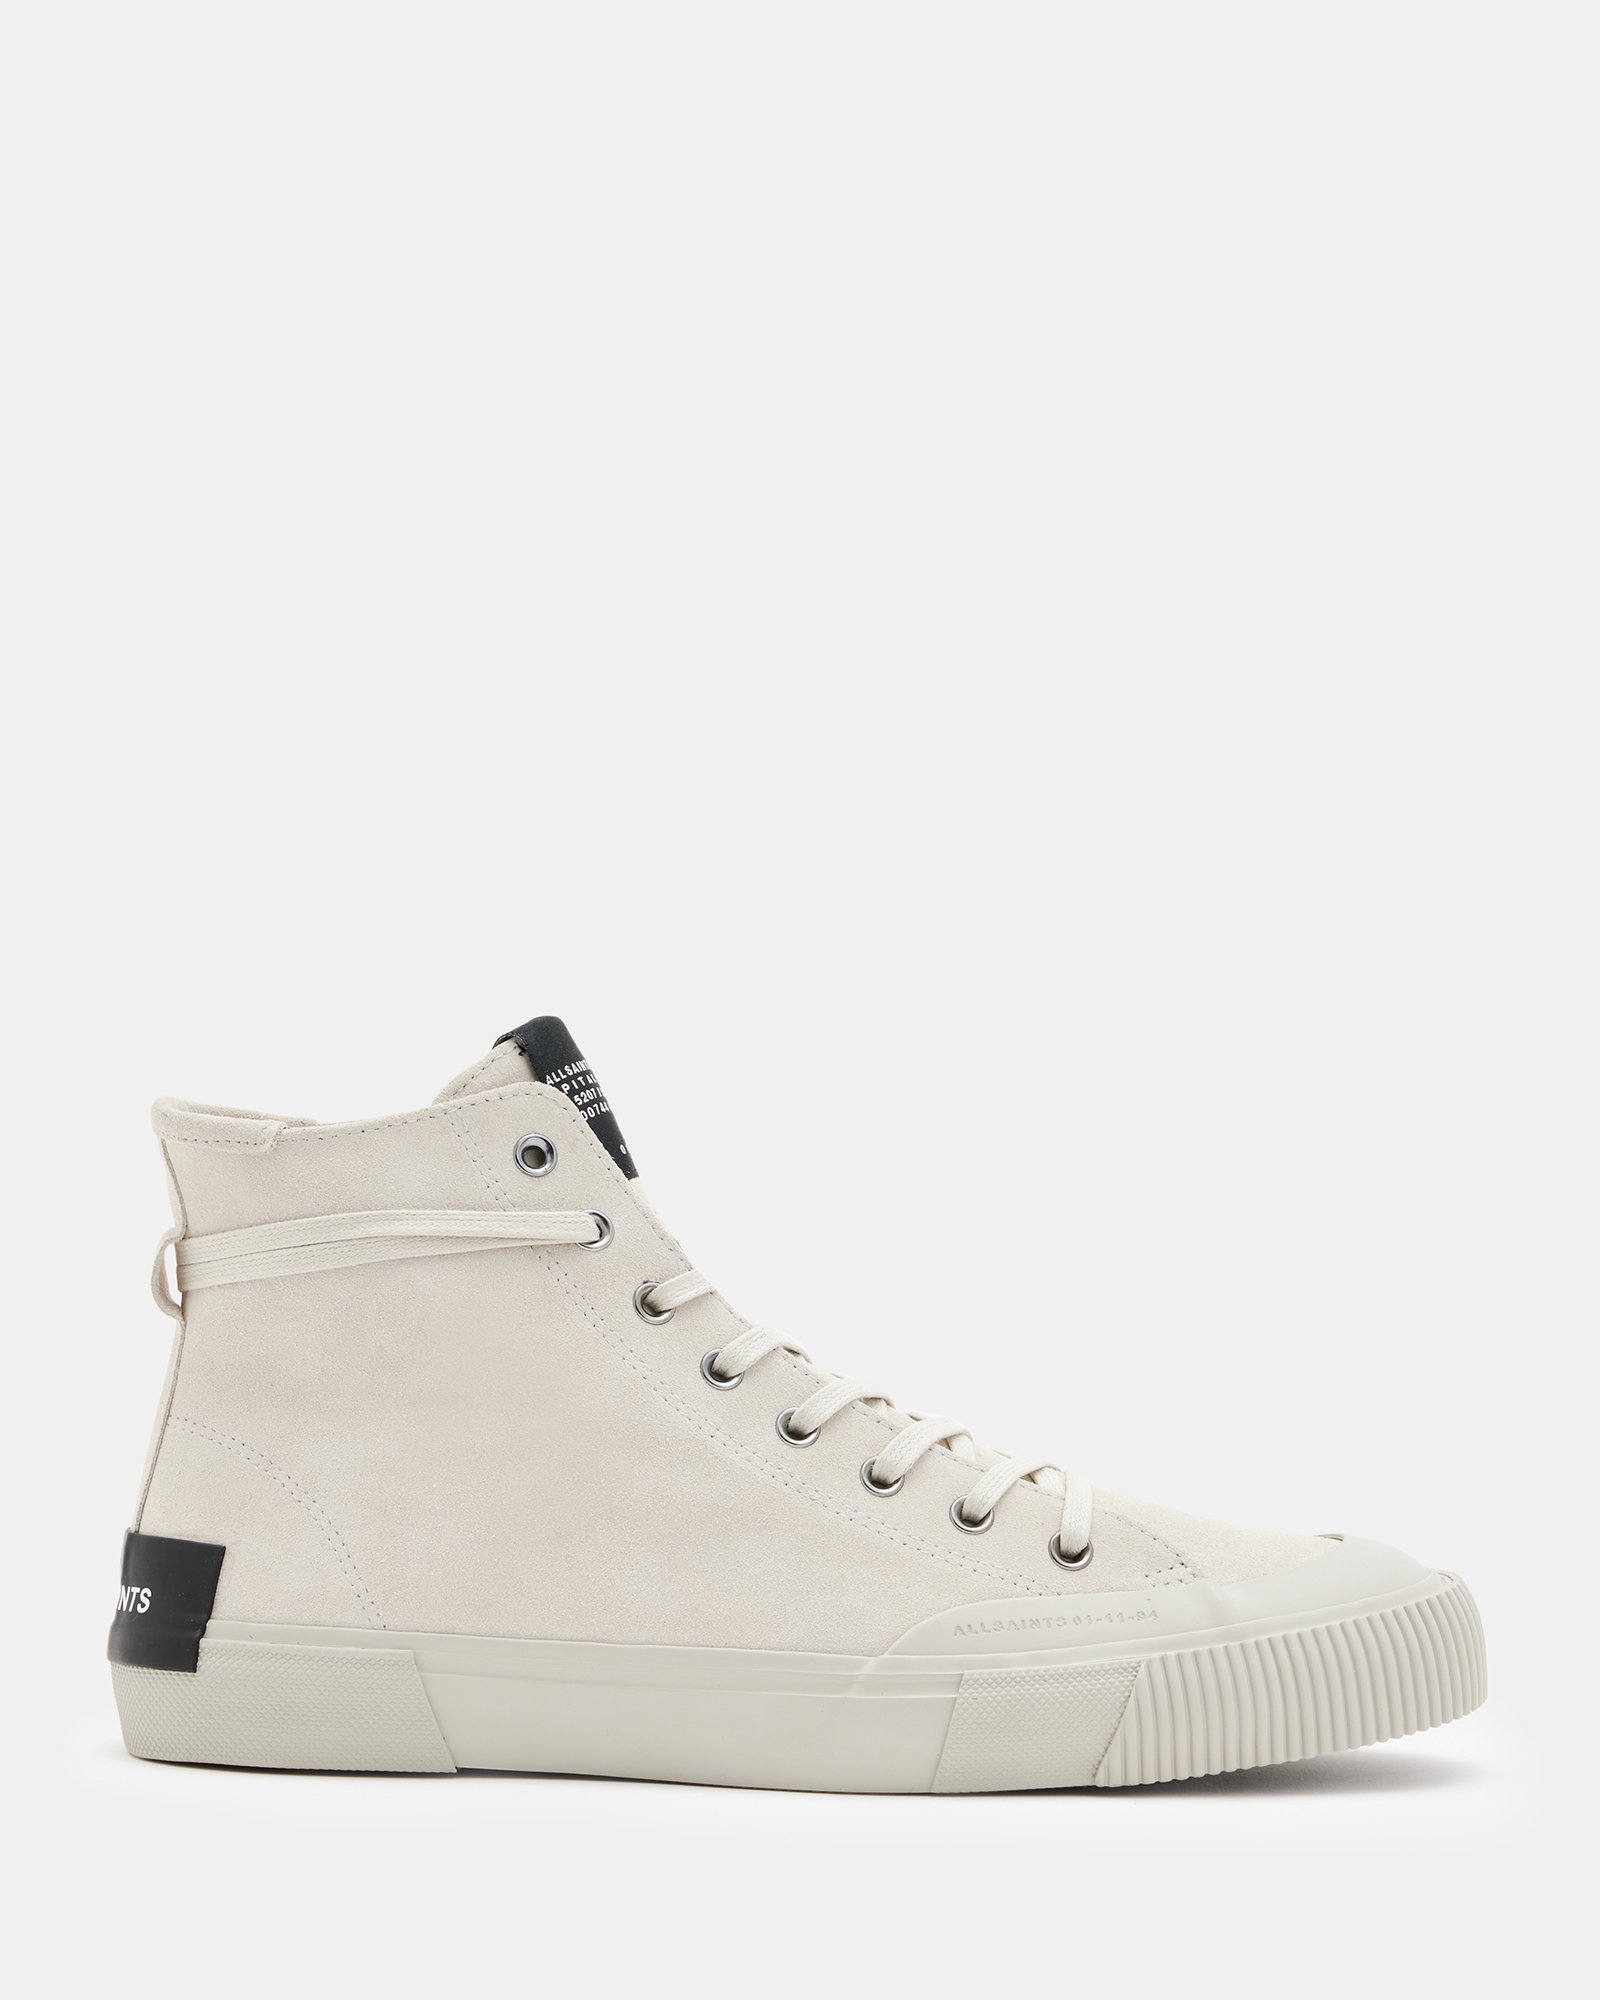 Dumont Suede High Top Sneakers Chalk White | ALLSAINTS US